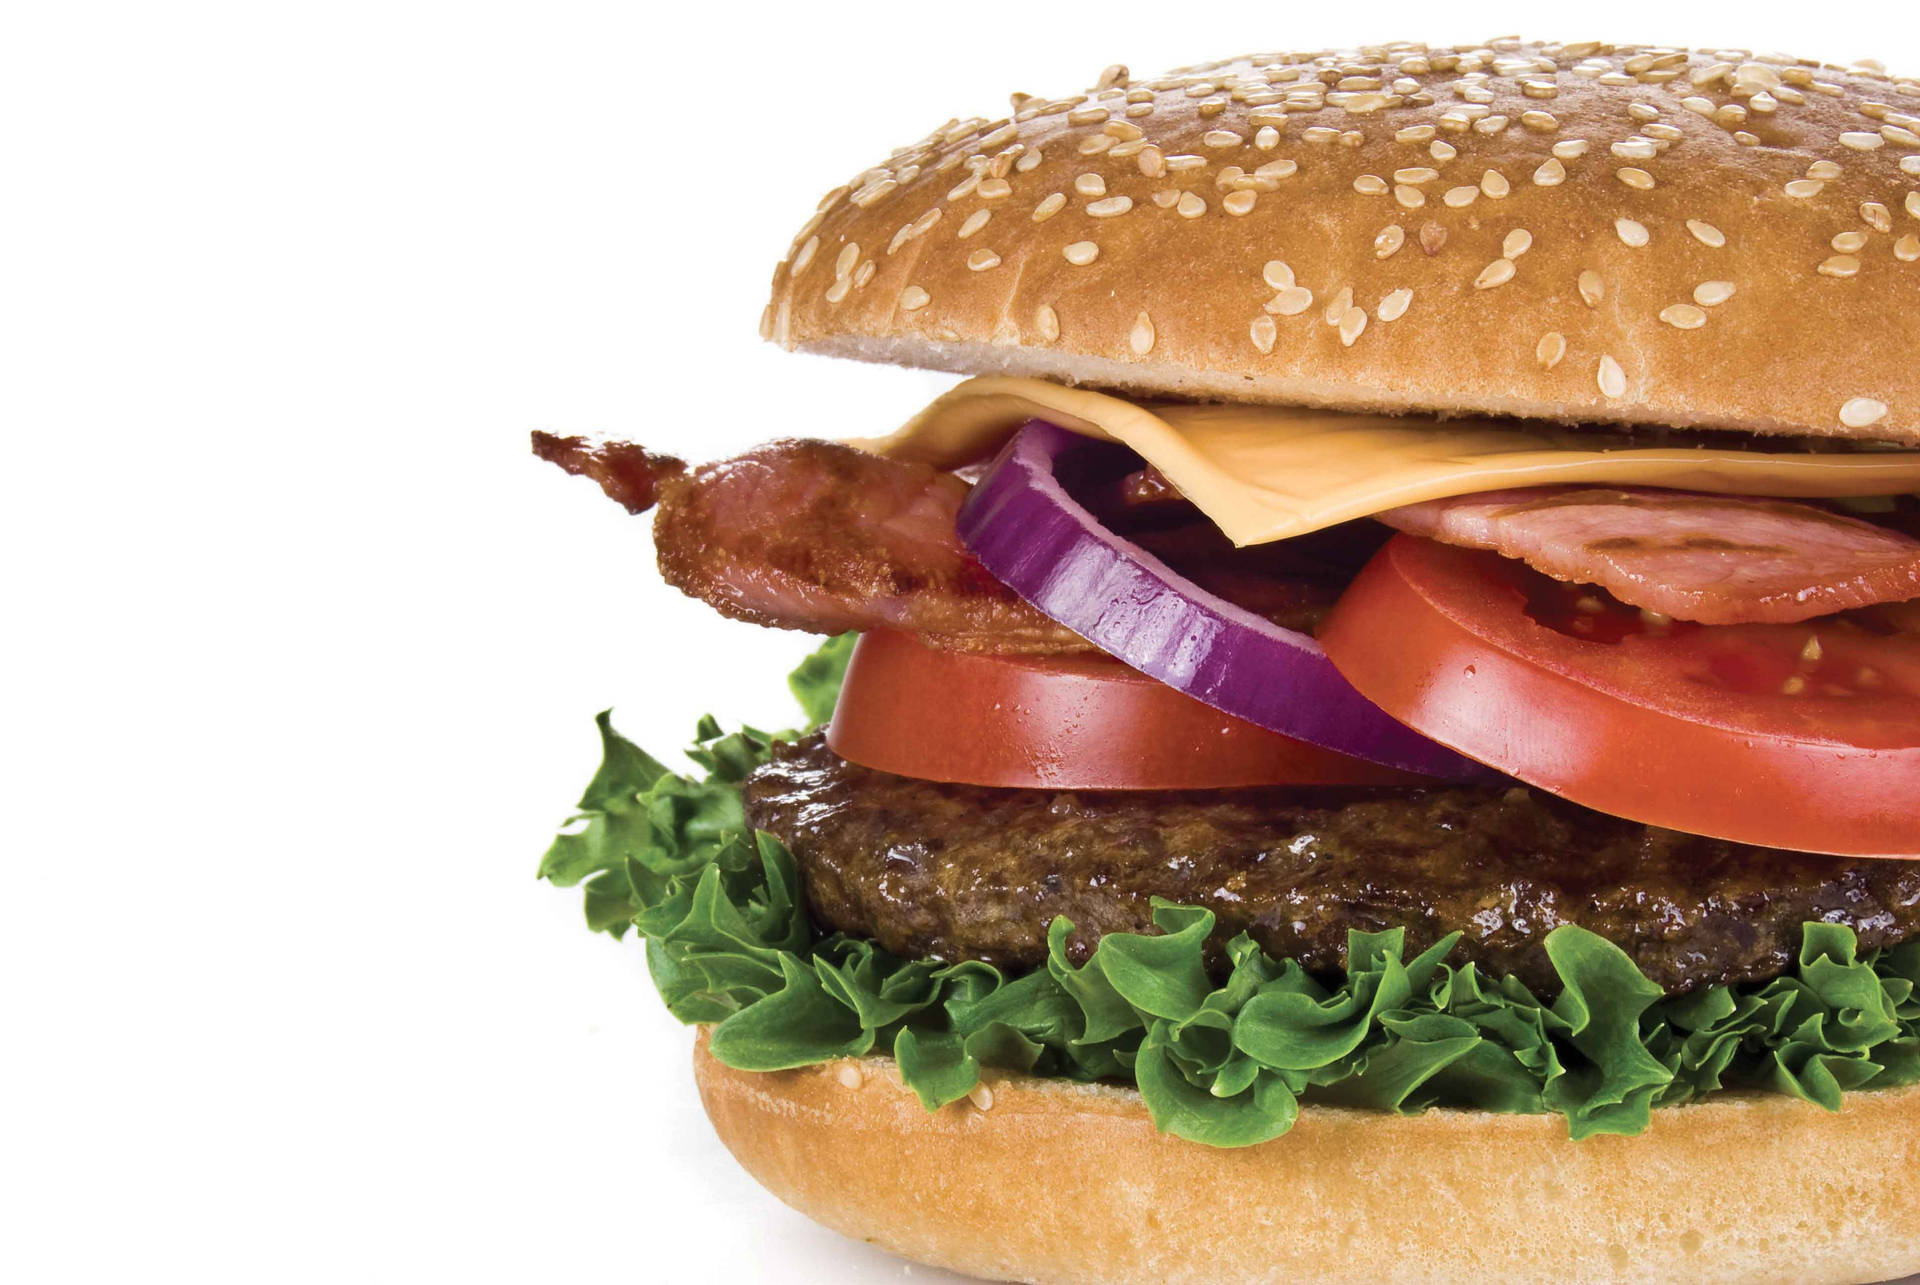 Burger King's Signature Whopper In High Resolution